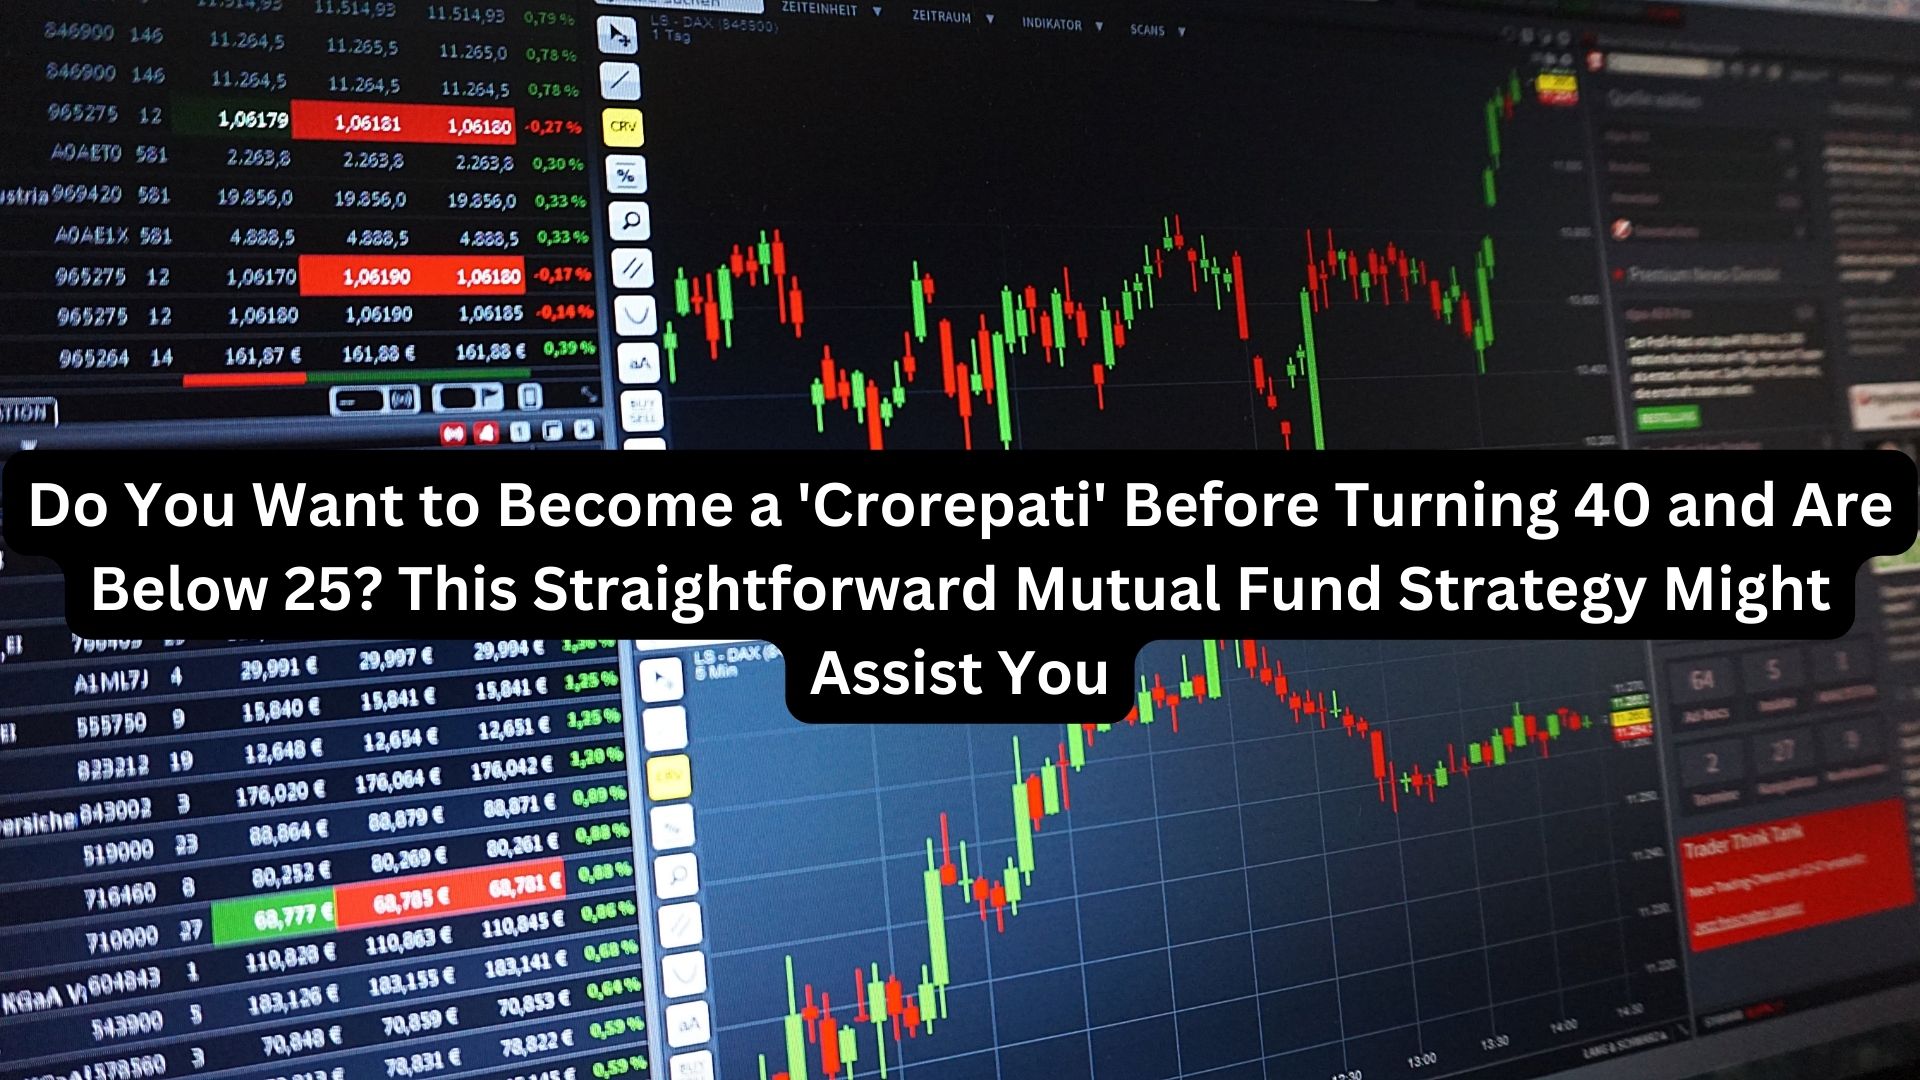 Do You Want to Become a 'Crorepati' Before Turning 40 and Are Below 25? This Straightforward Mutual Fund Strategy Might Assist You